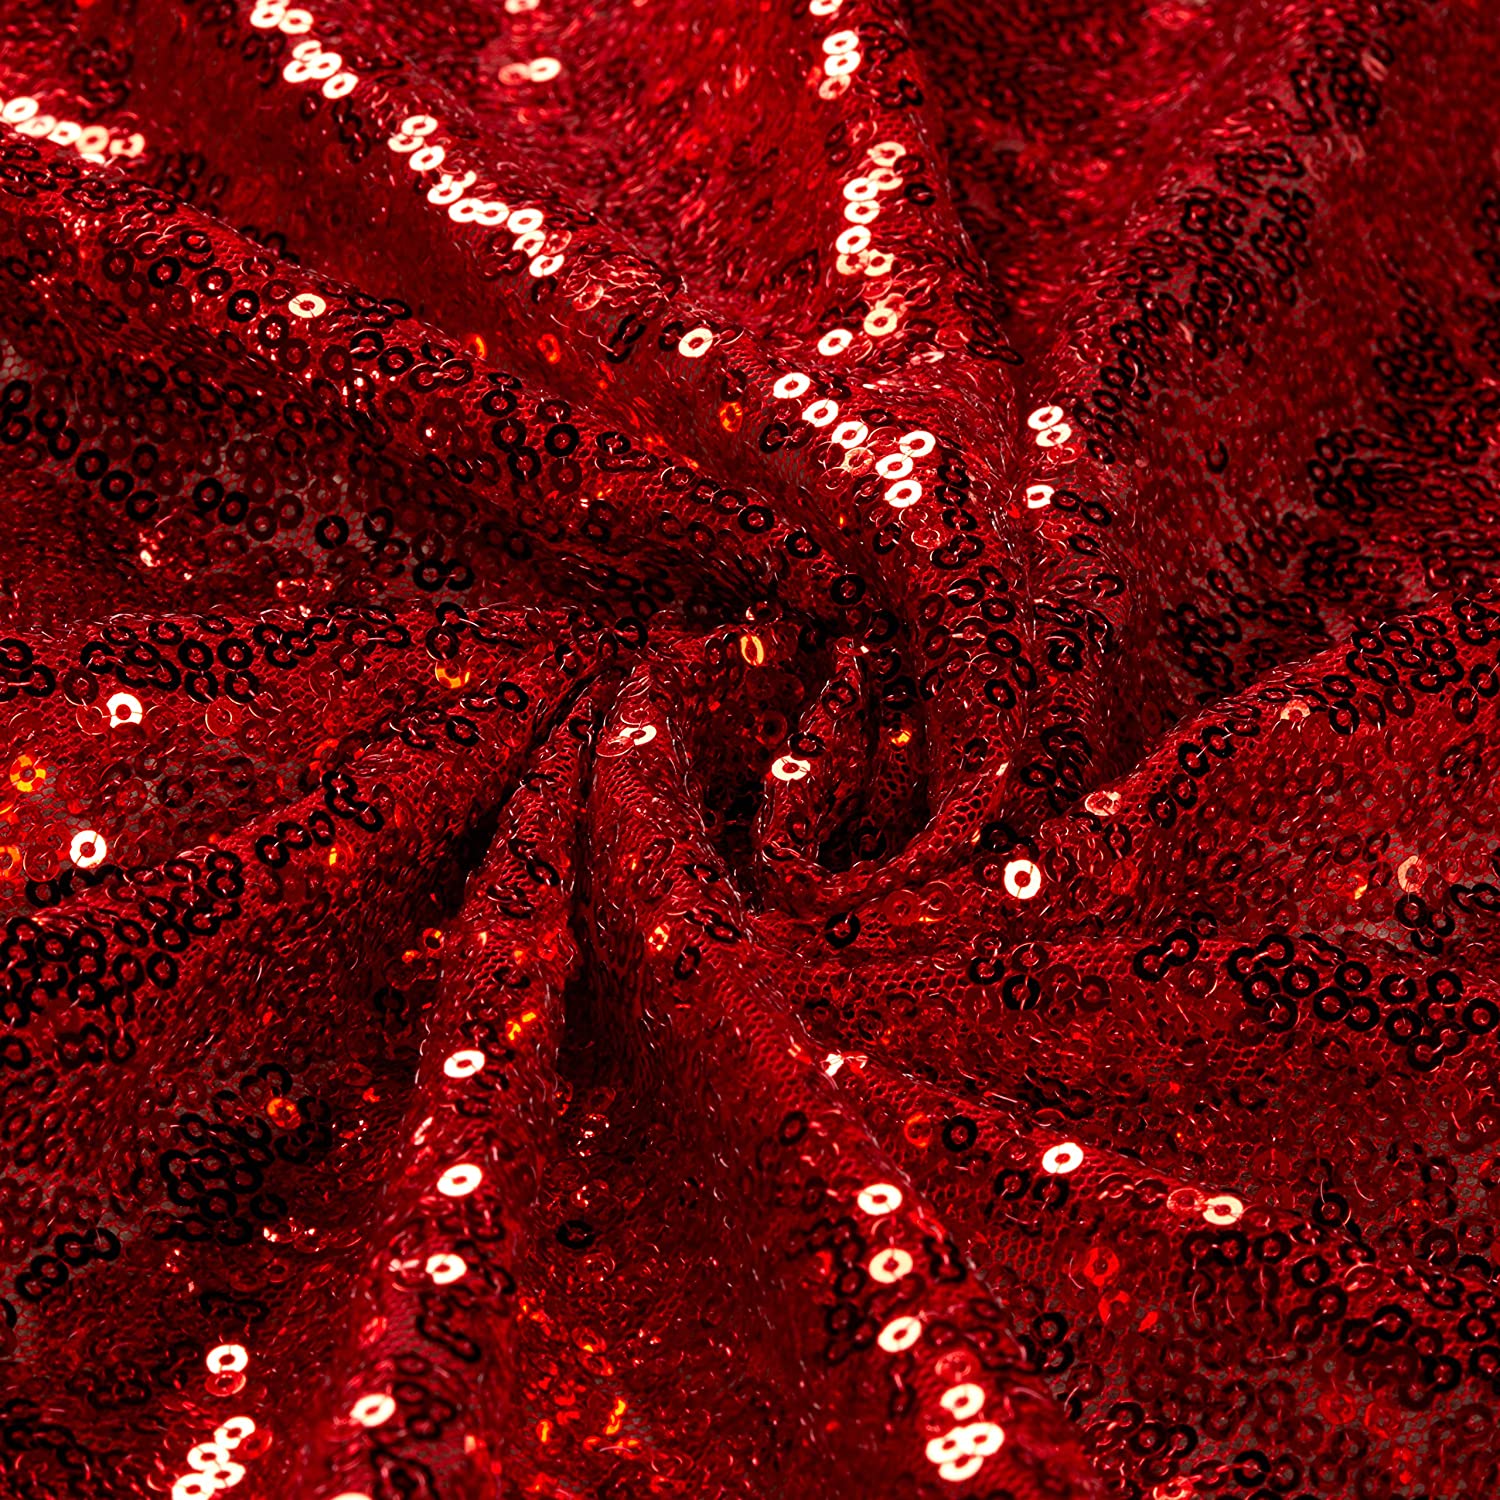 3MM Red Mini Sequin Fabric By The Yard - 53/54â€ [3MM-SEQ-RED] - $6.99 :  , Burlap for Wedding and Special Events